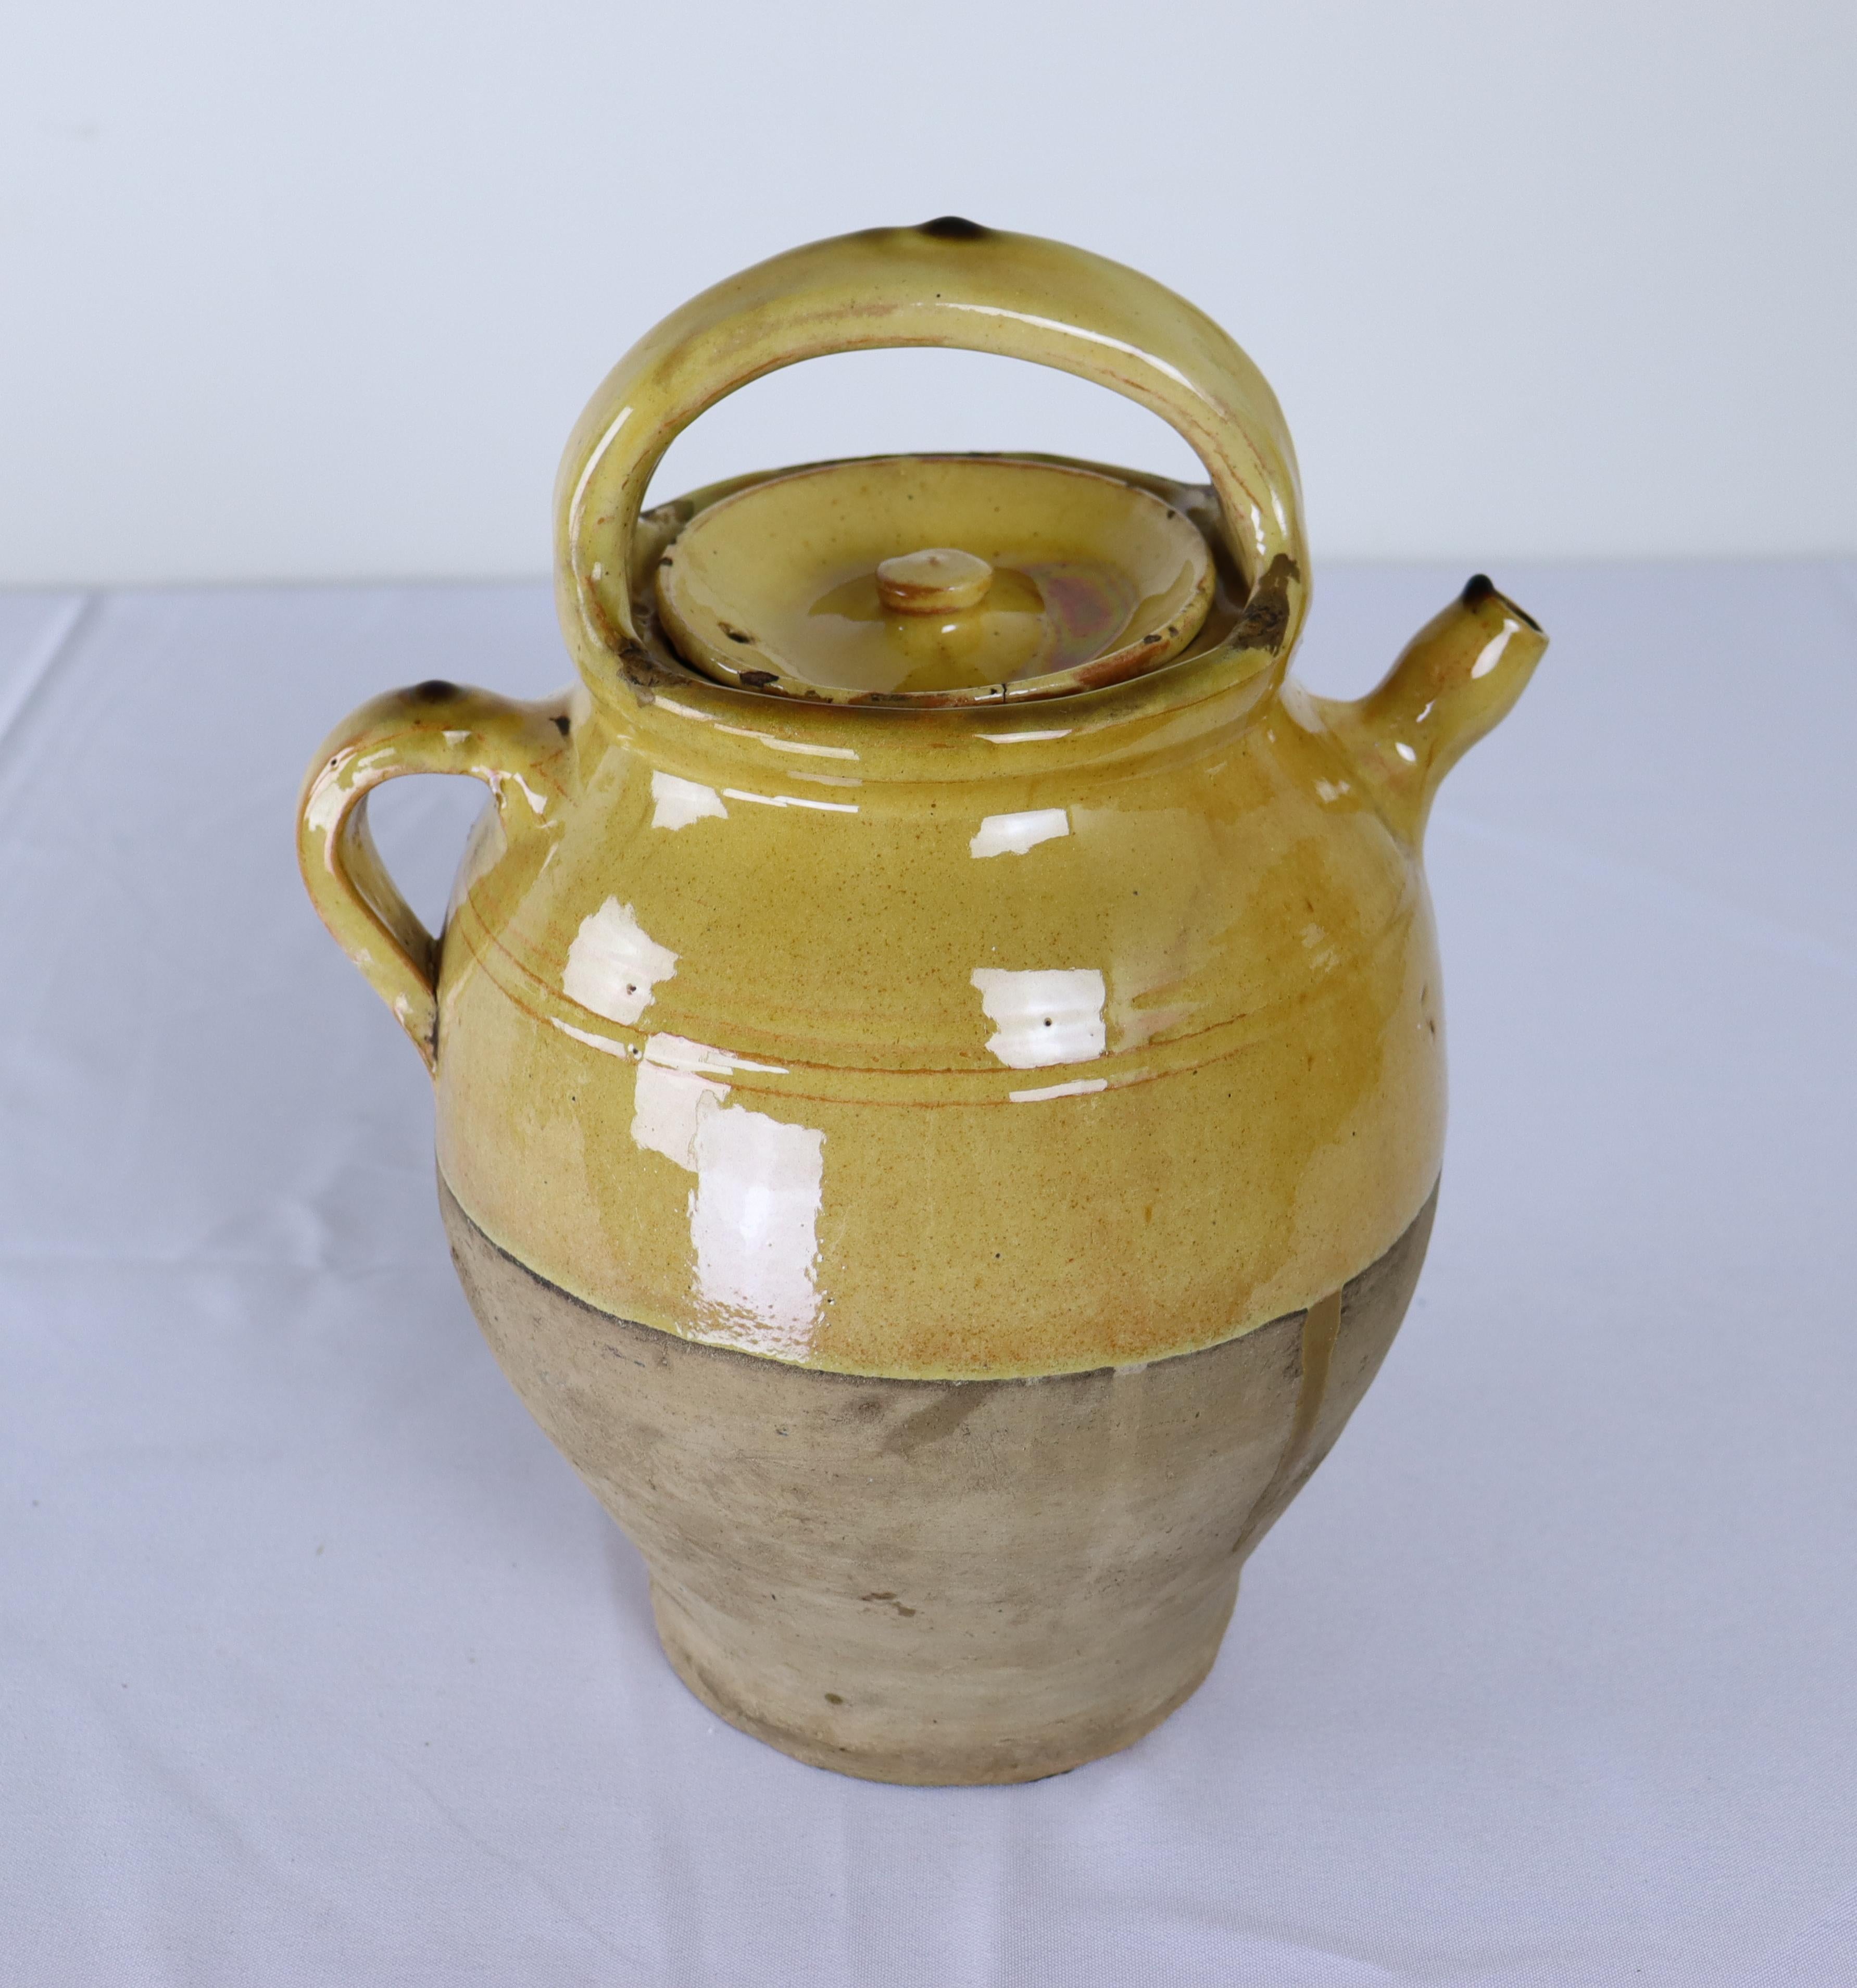 A French Antique terra cotta water jug or cruche in traditional mustard yellow glaze.  Festooned with desirable drips and glaze pooling.  Very hard to find with lid intact.  Some wear around the rim, shown,  but no chips.  A find!